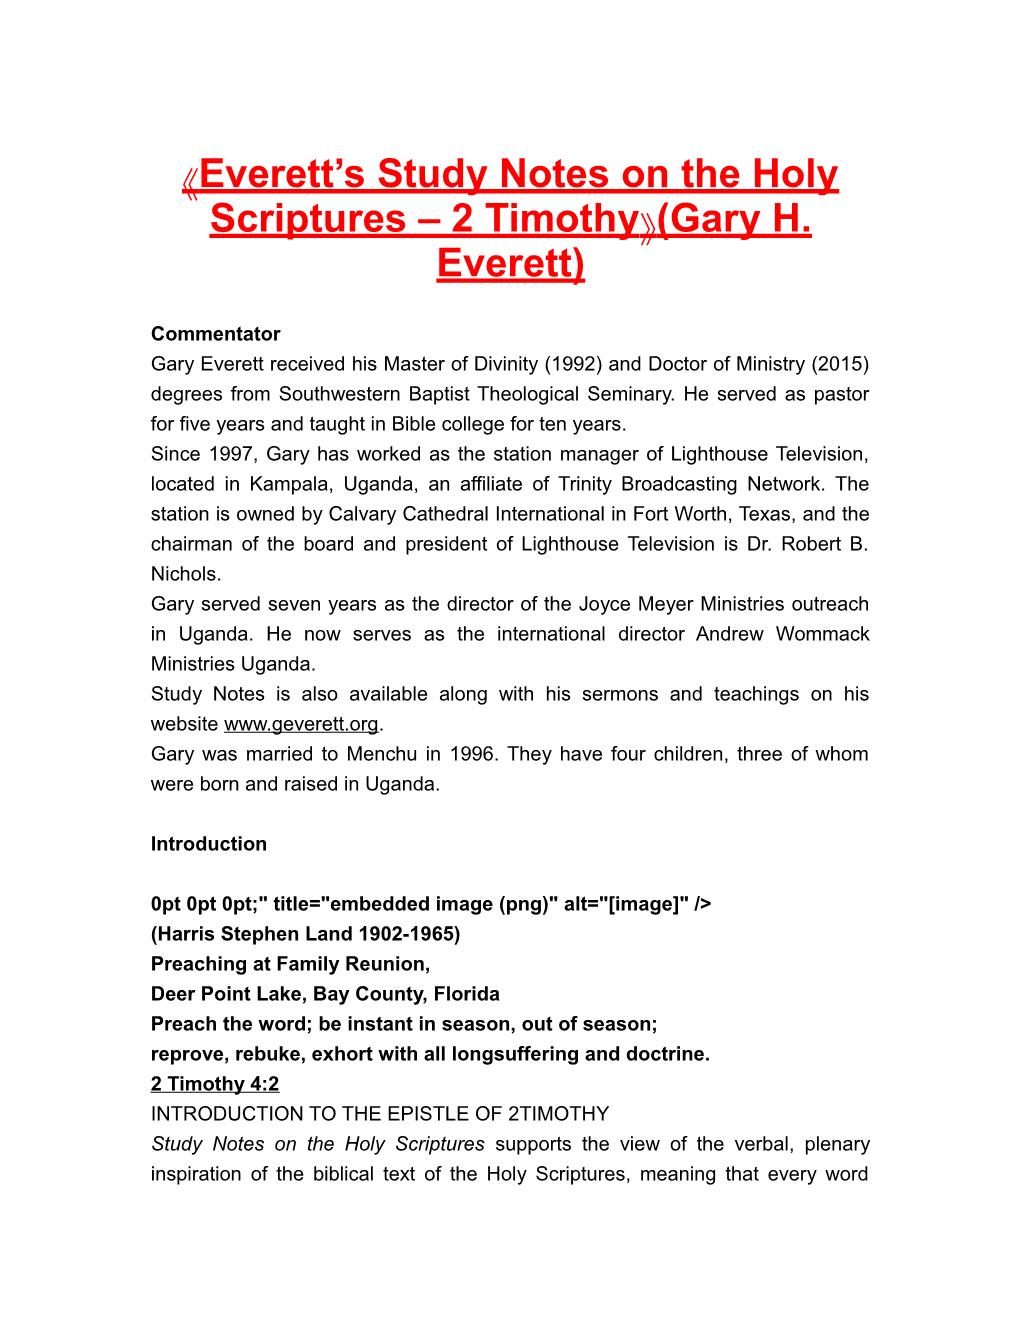 Everett S Study Notes on the Holy Scriptures 2 Timothy (Gary H. Everett)